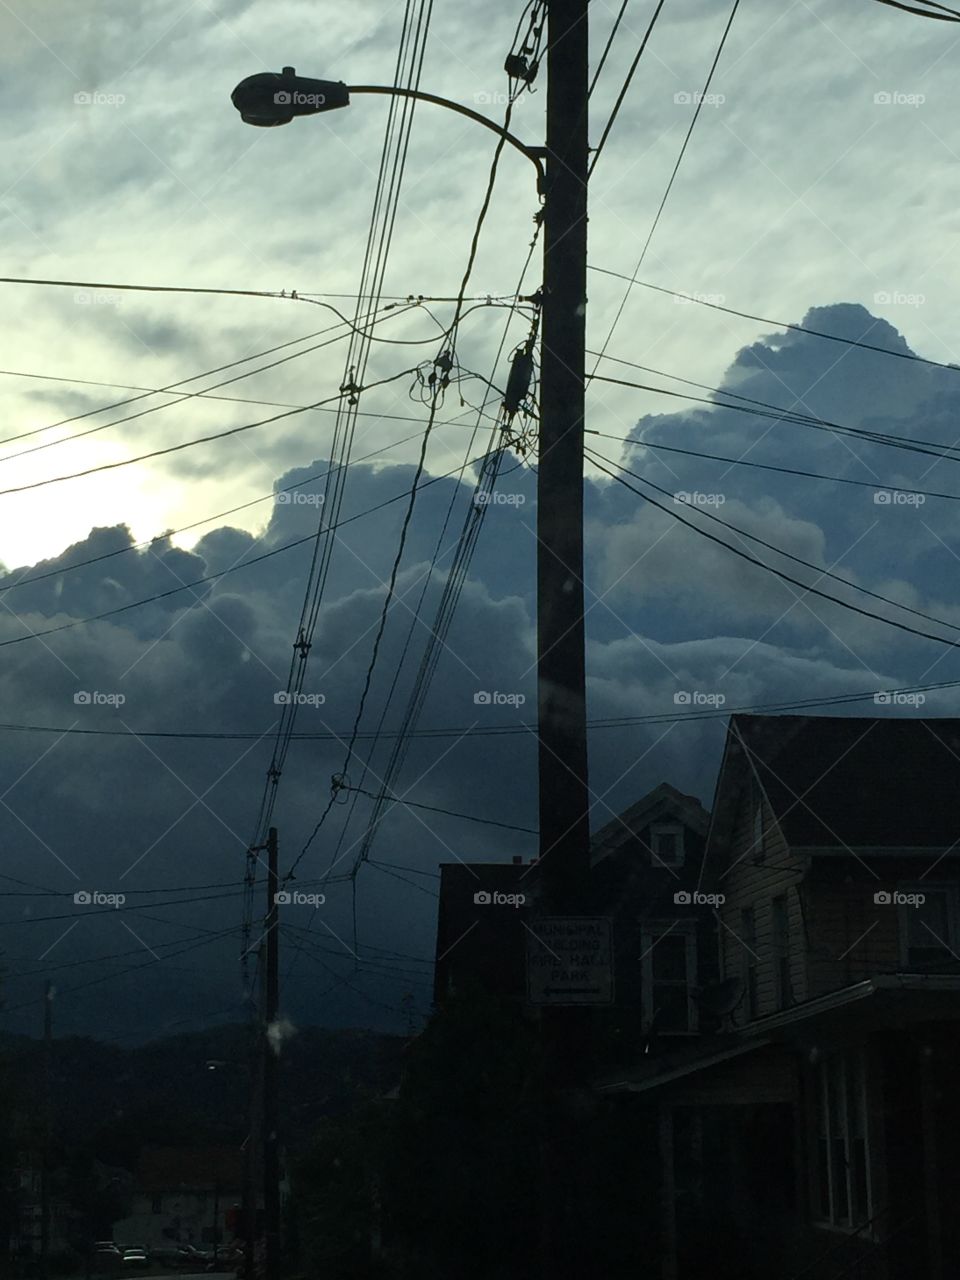 The clouds stayed like this so I took a picture of them 